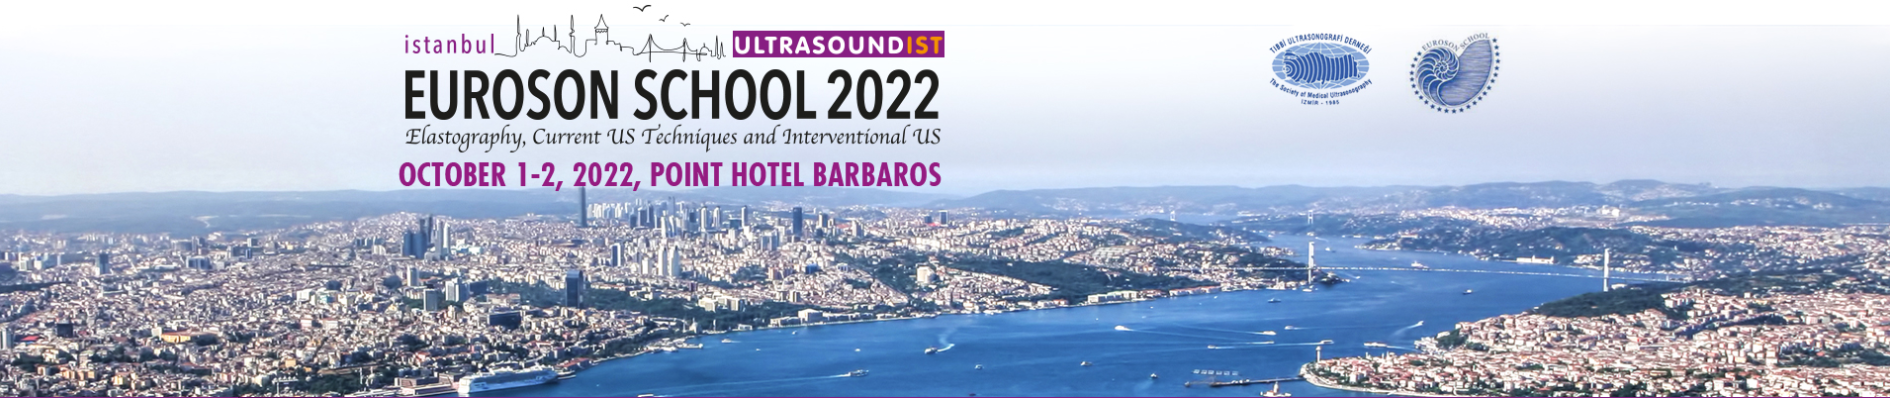 Euroson School 2022-Elastography Current US Techniques and Interventional US